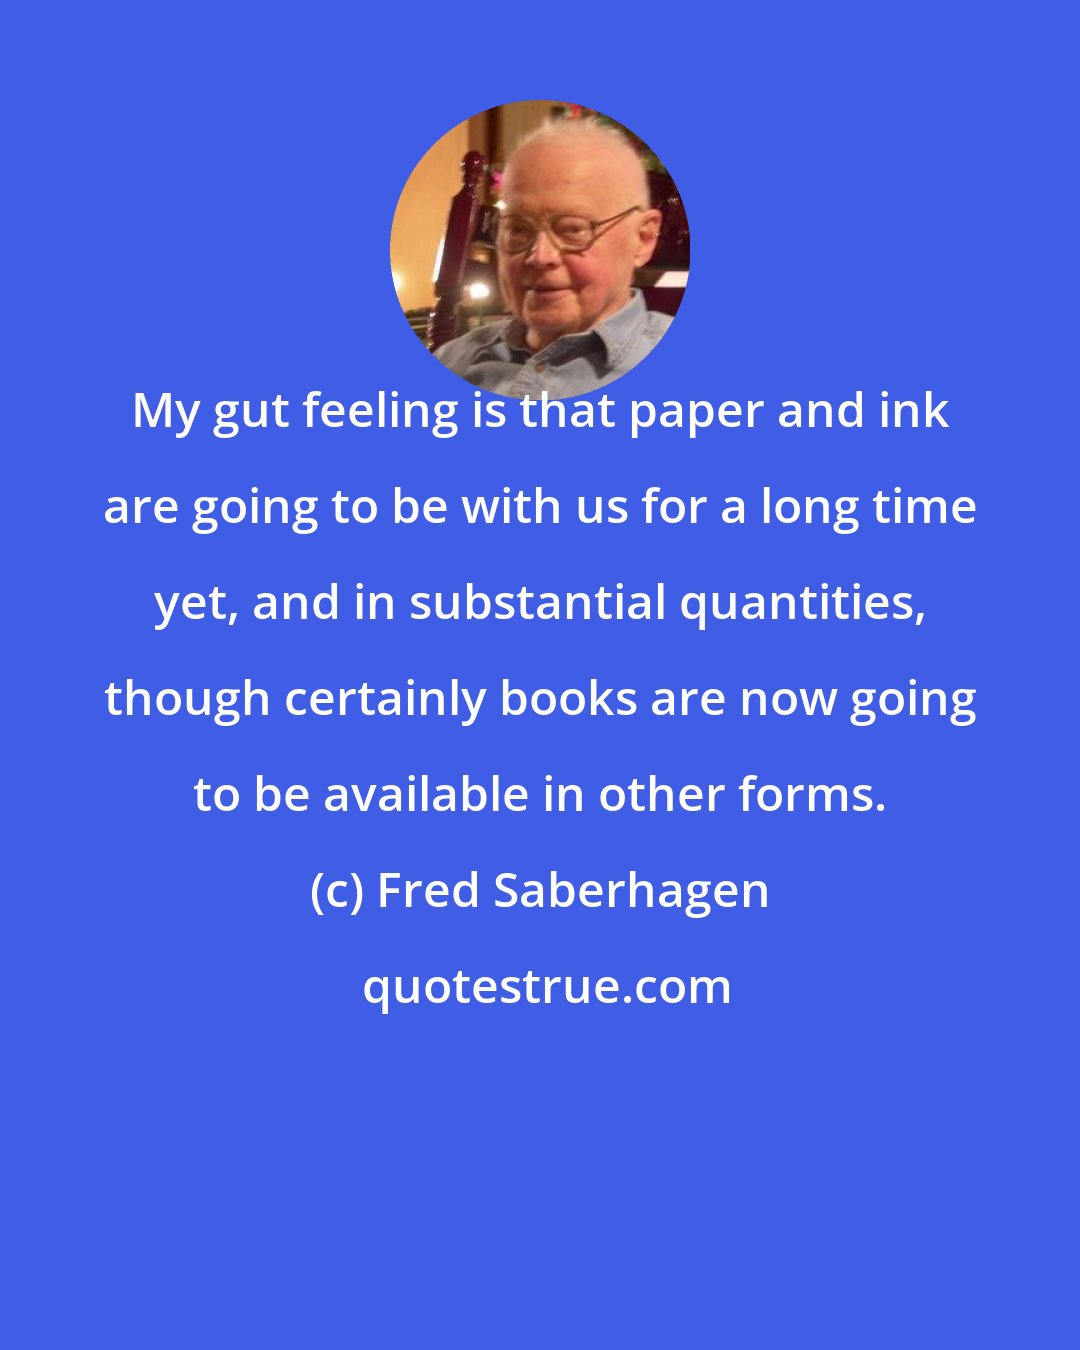 Fred Saberhagen: My gut feeling is that paper and ink are going to be with us for a long time yet, and in substantial quantities, though certainly books are now going to be available in other forms.